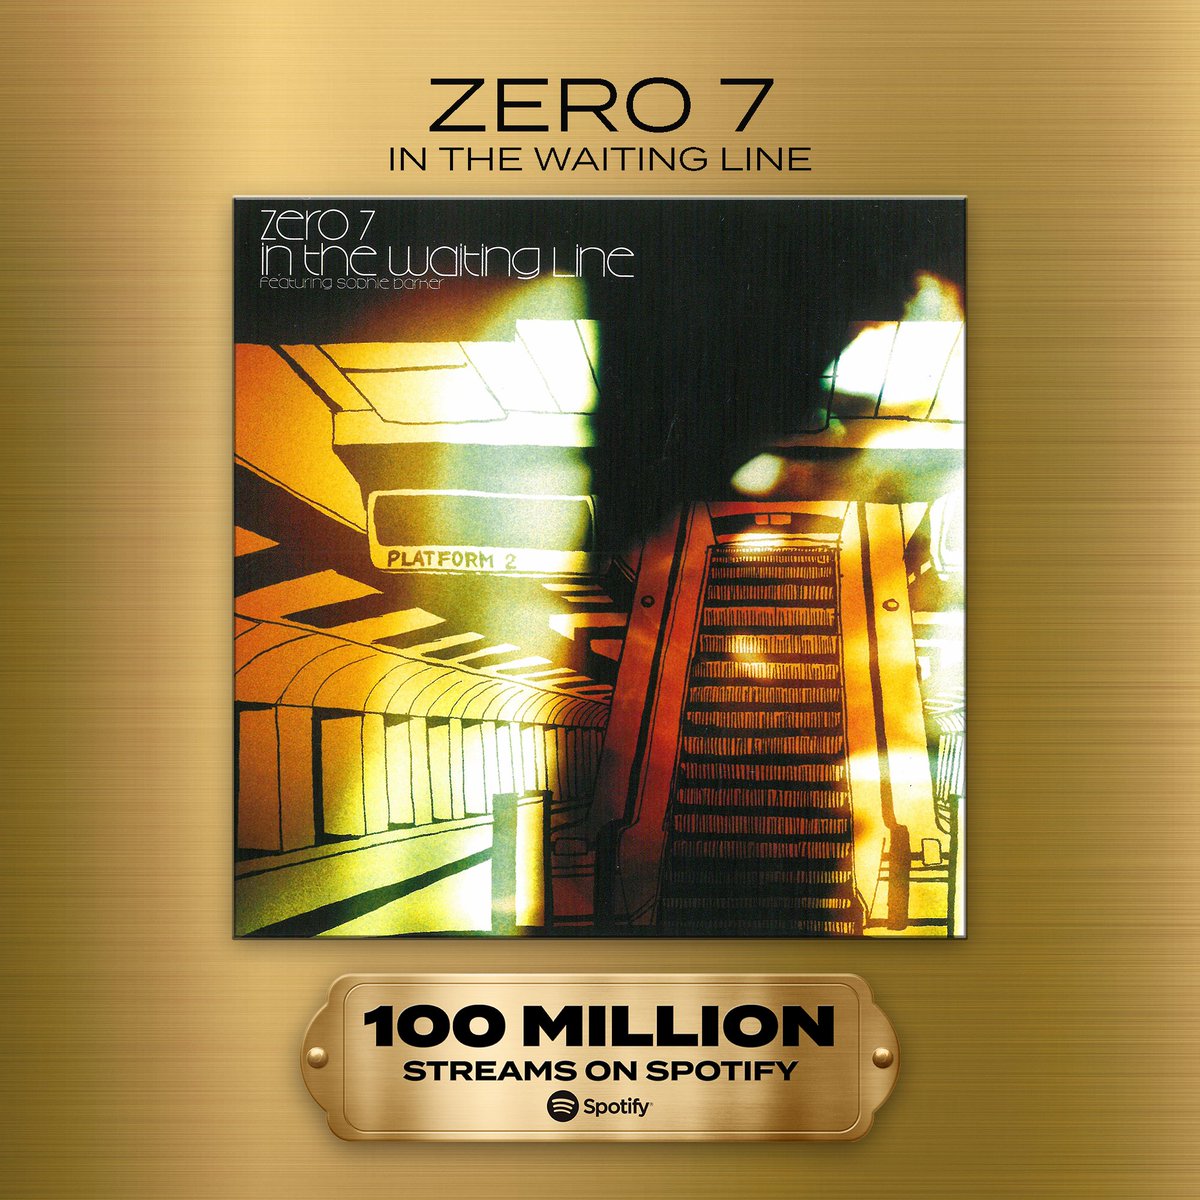 🍾Congratulations to Zero 7 for reaching 100 Million Streams on Spotify for their track In The Waiting Line🍾